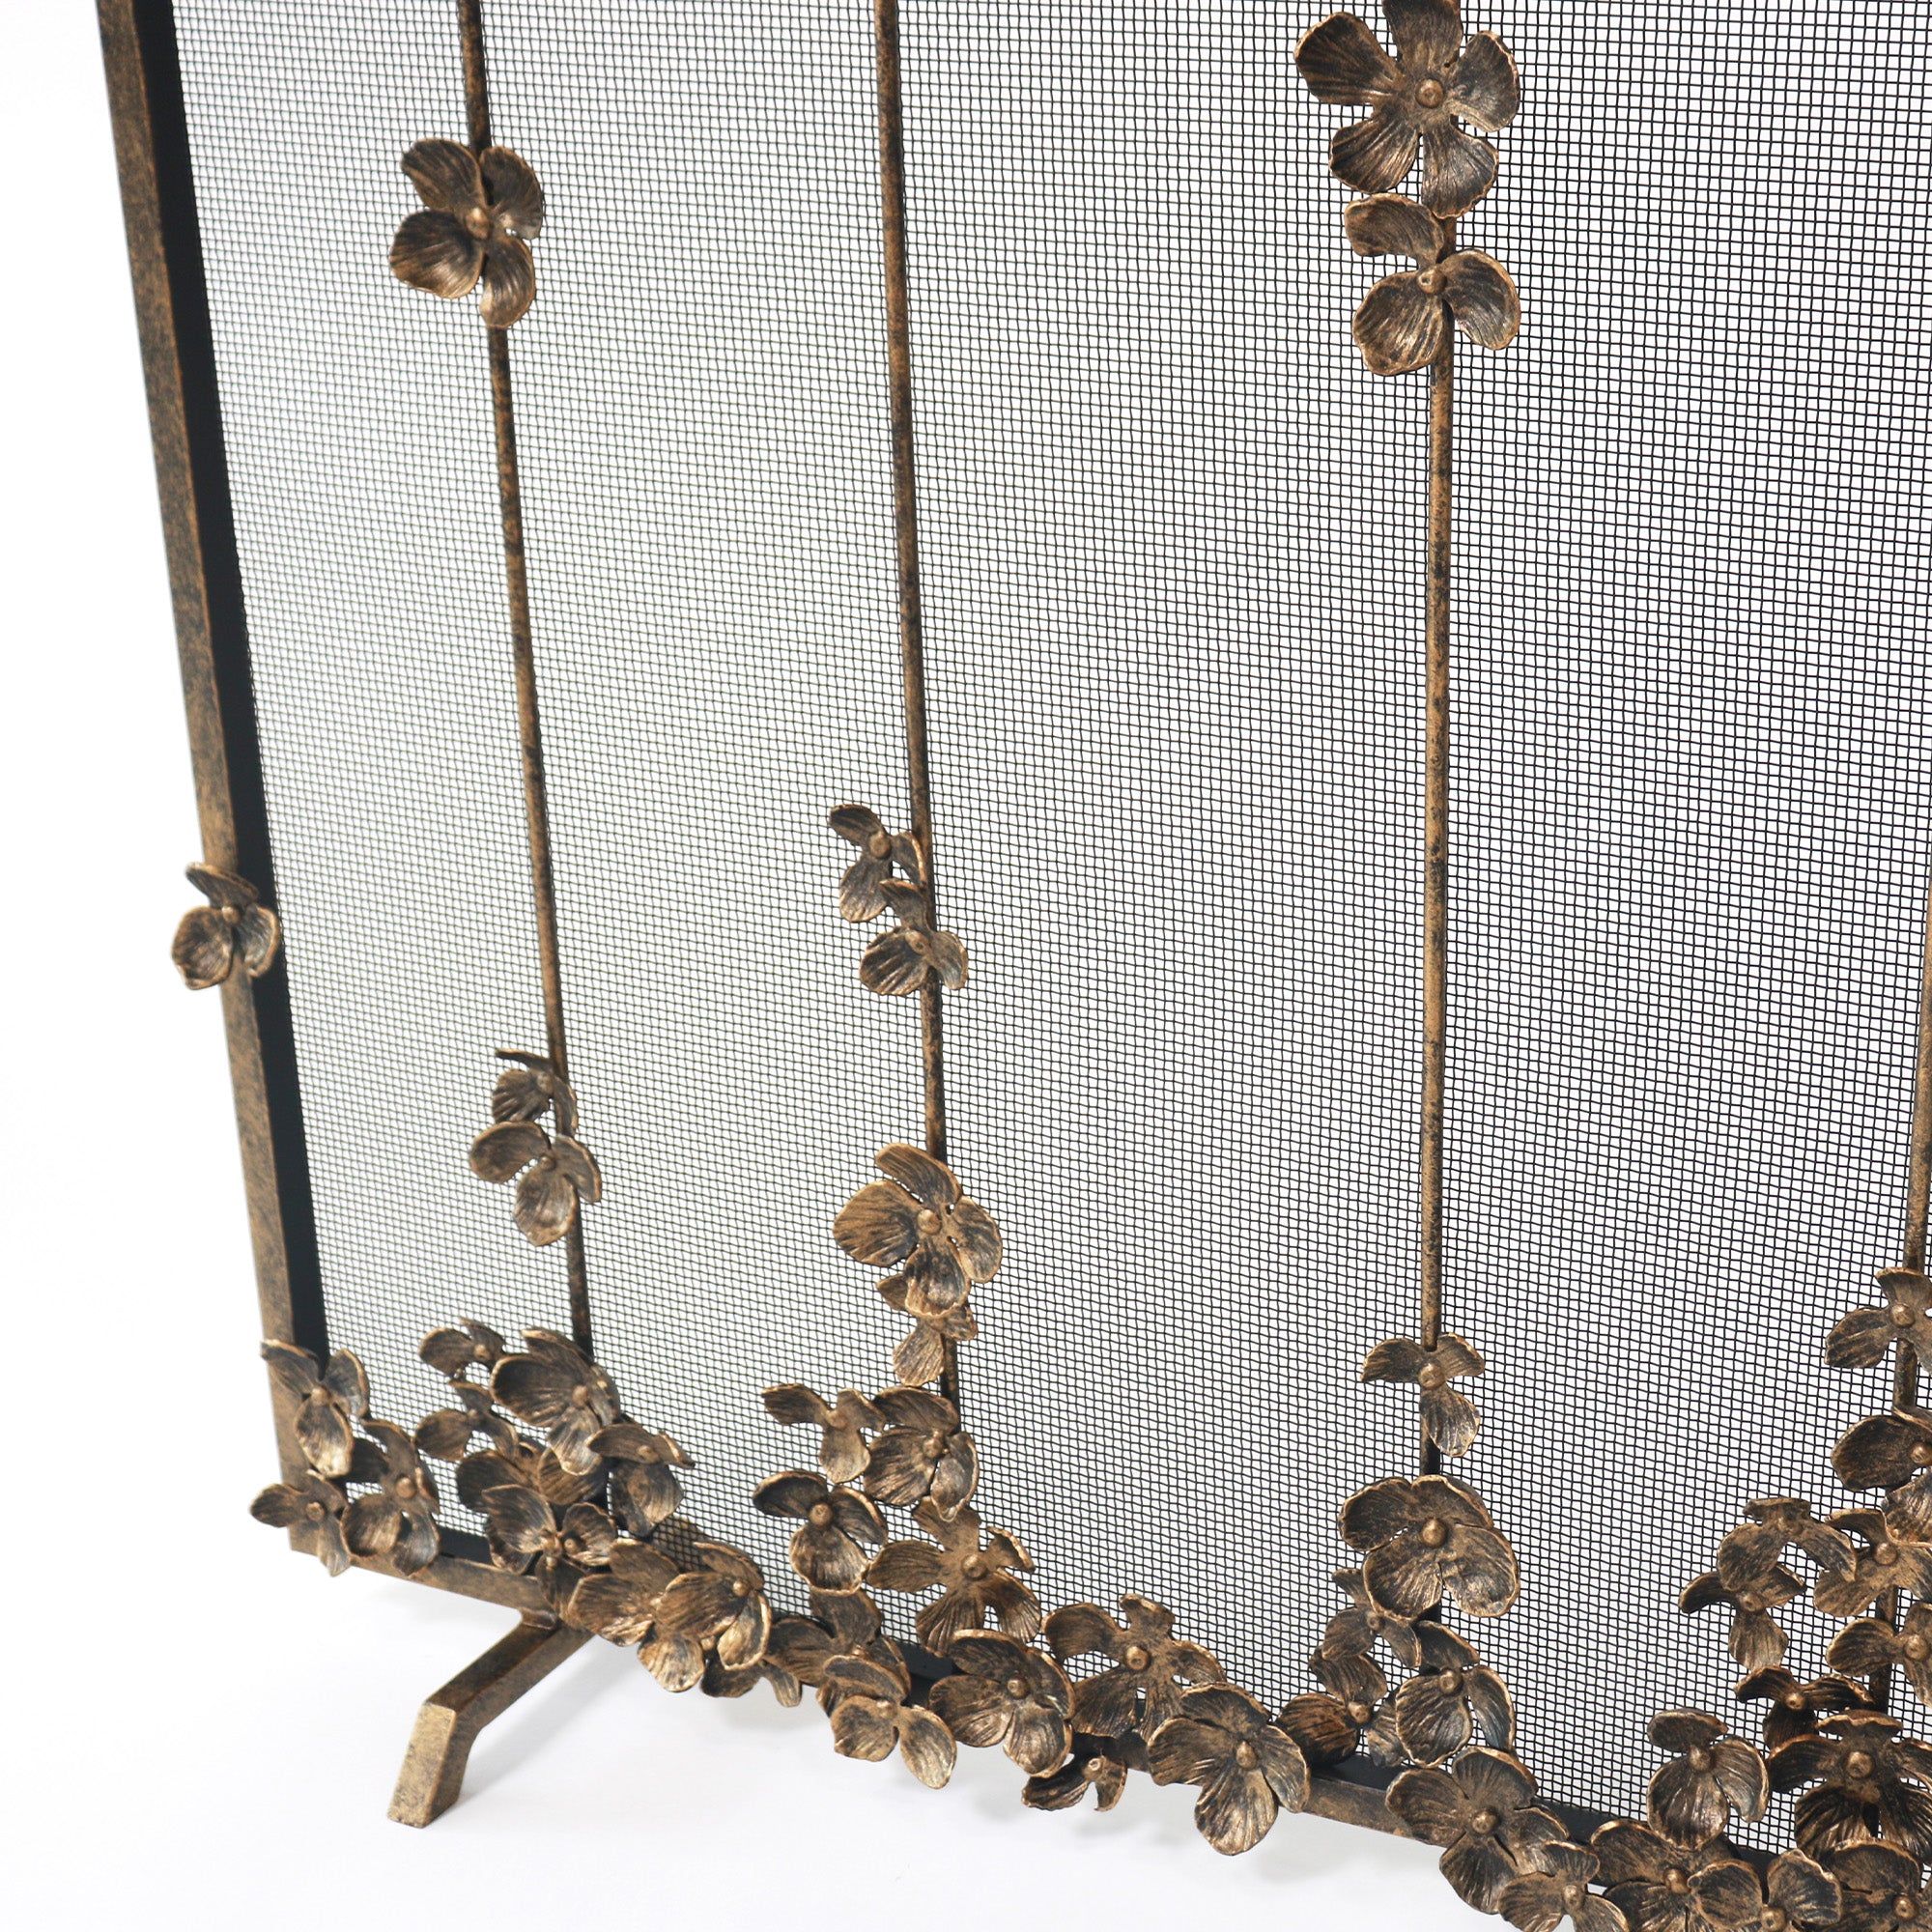 Cascading Blooms Fireplace Screen